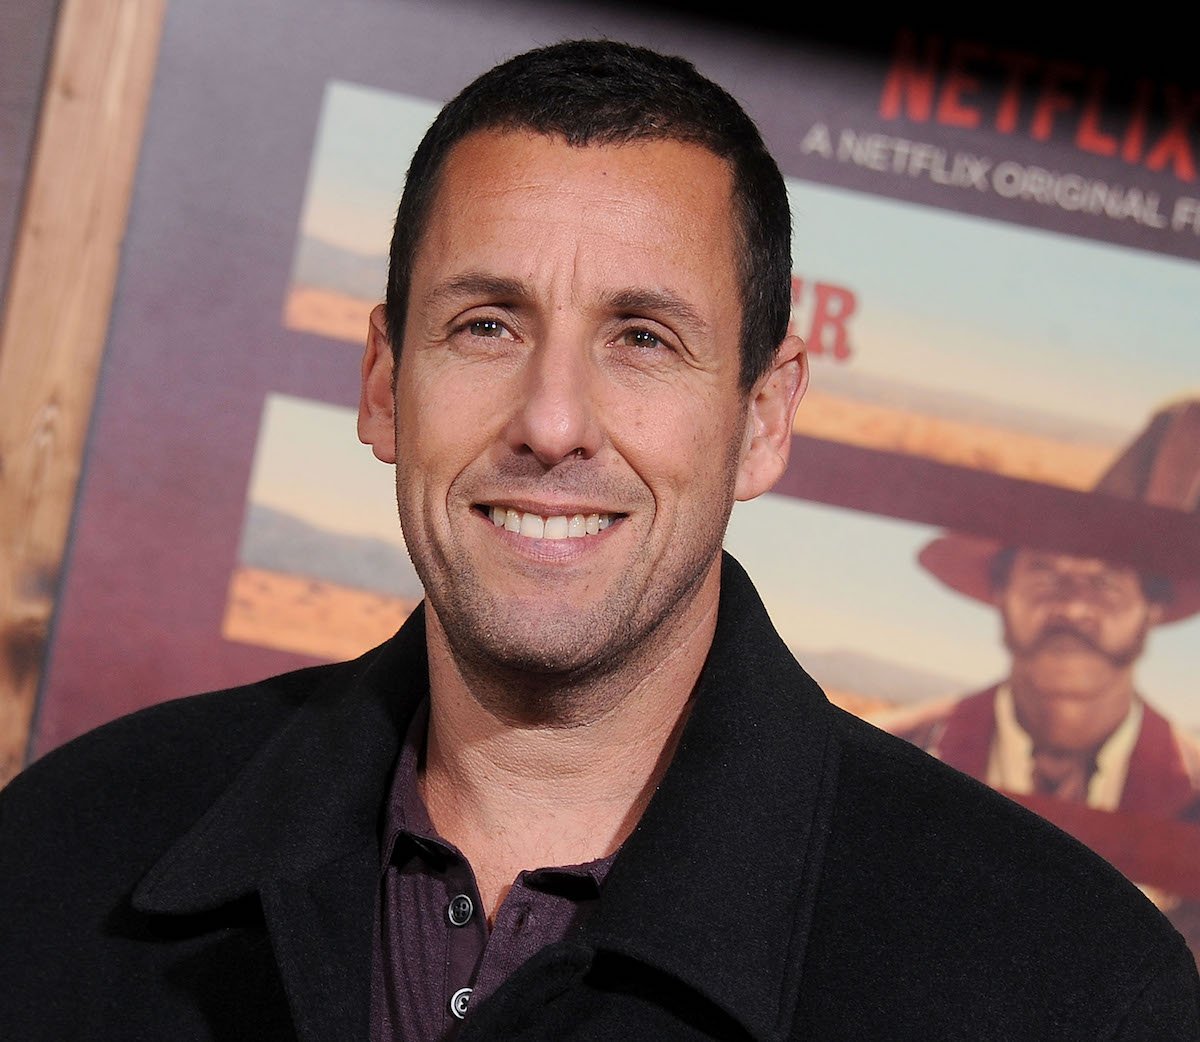 Adam Sandler arrives at the premiere of Netflix's "The Ridiculous 6" at AMC Universal City Walk on November 30, 2015 in Universal City, California.